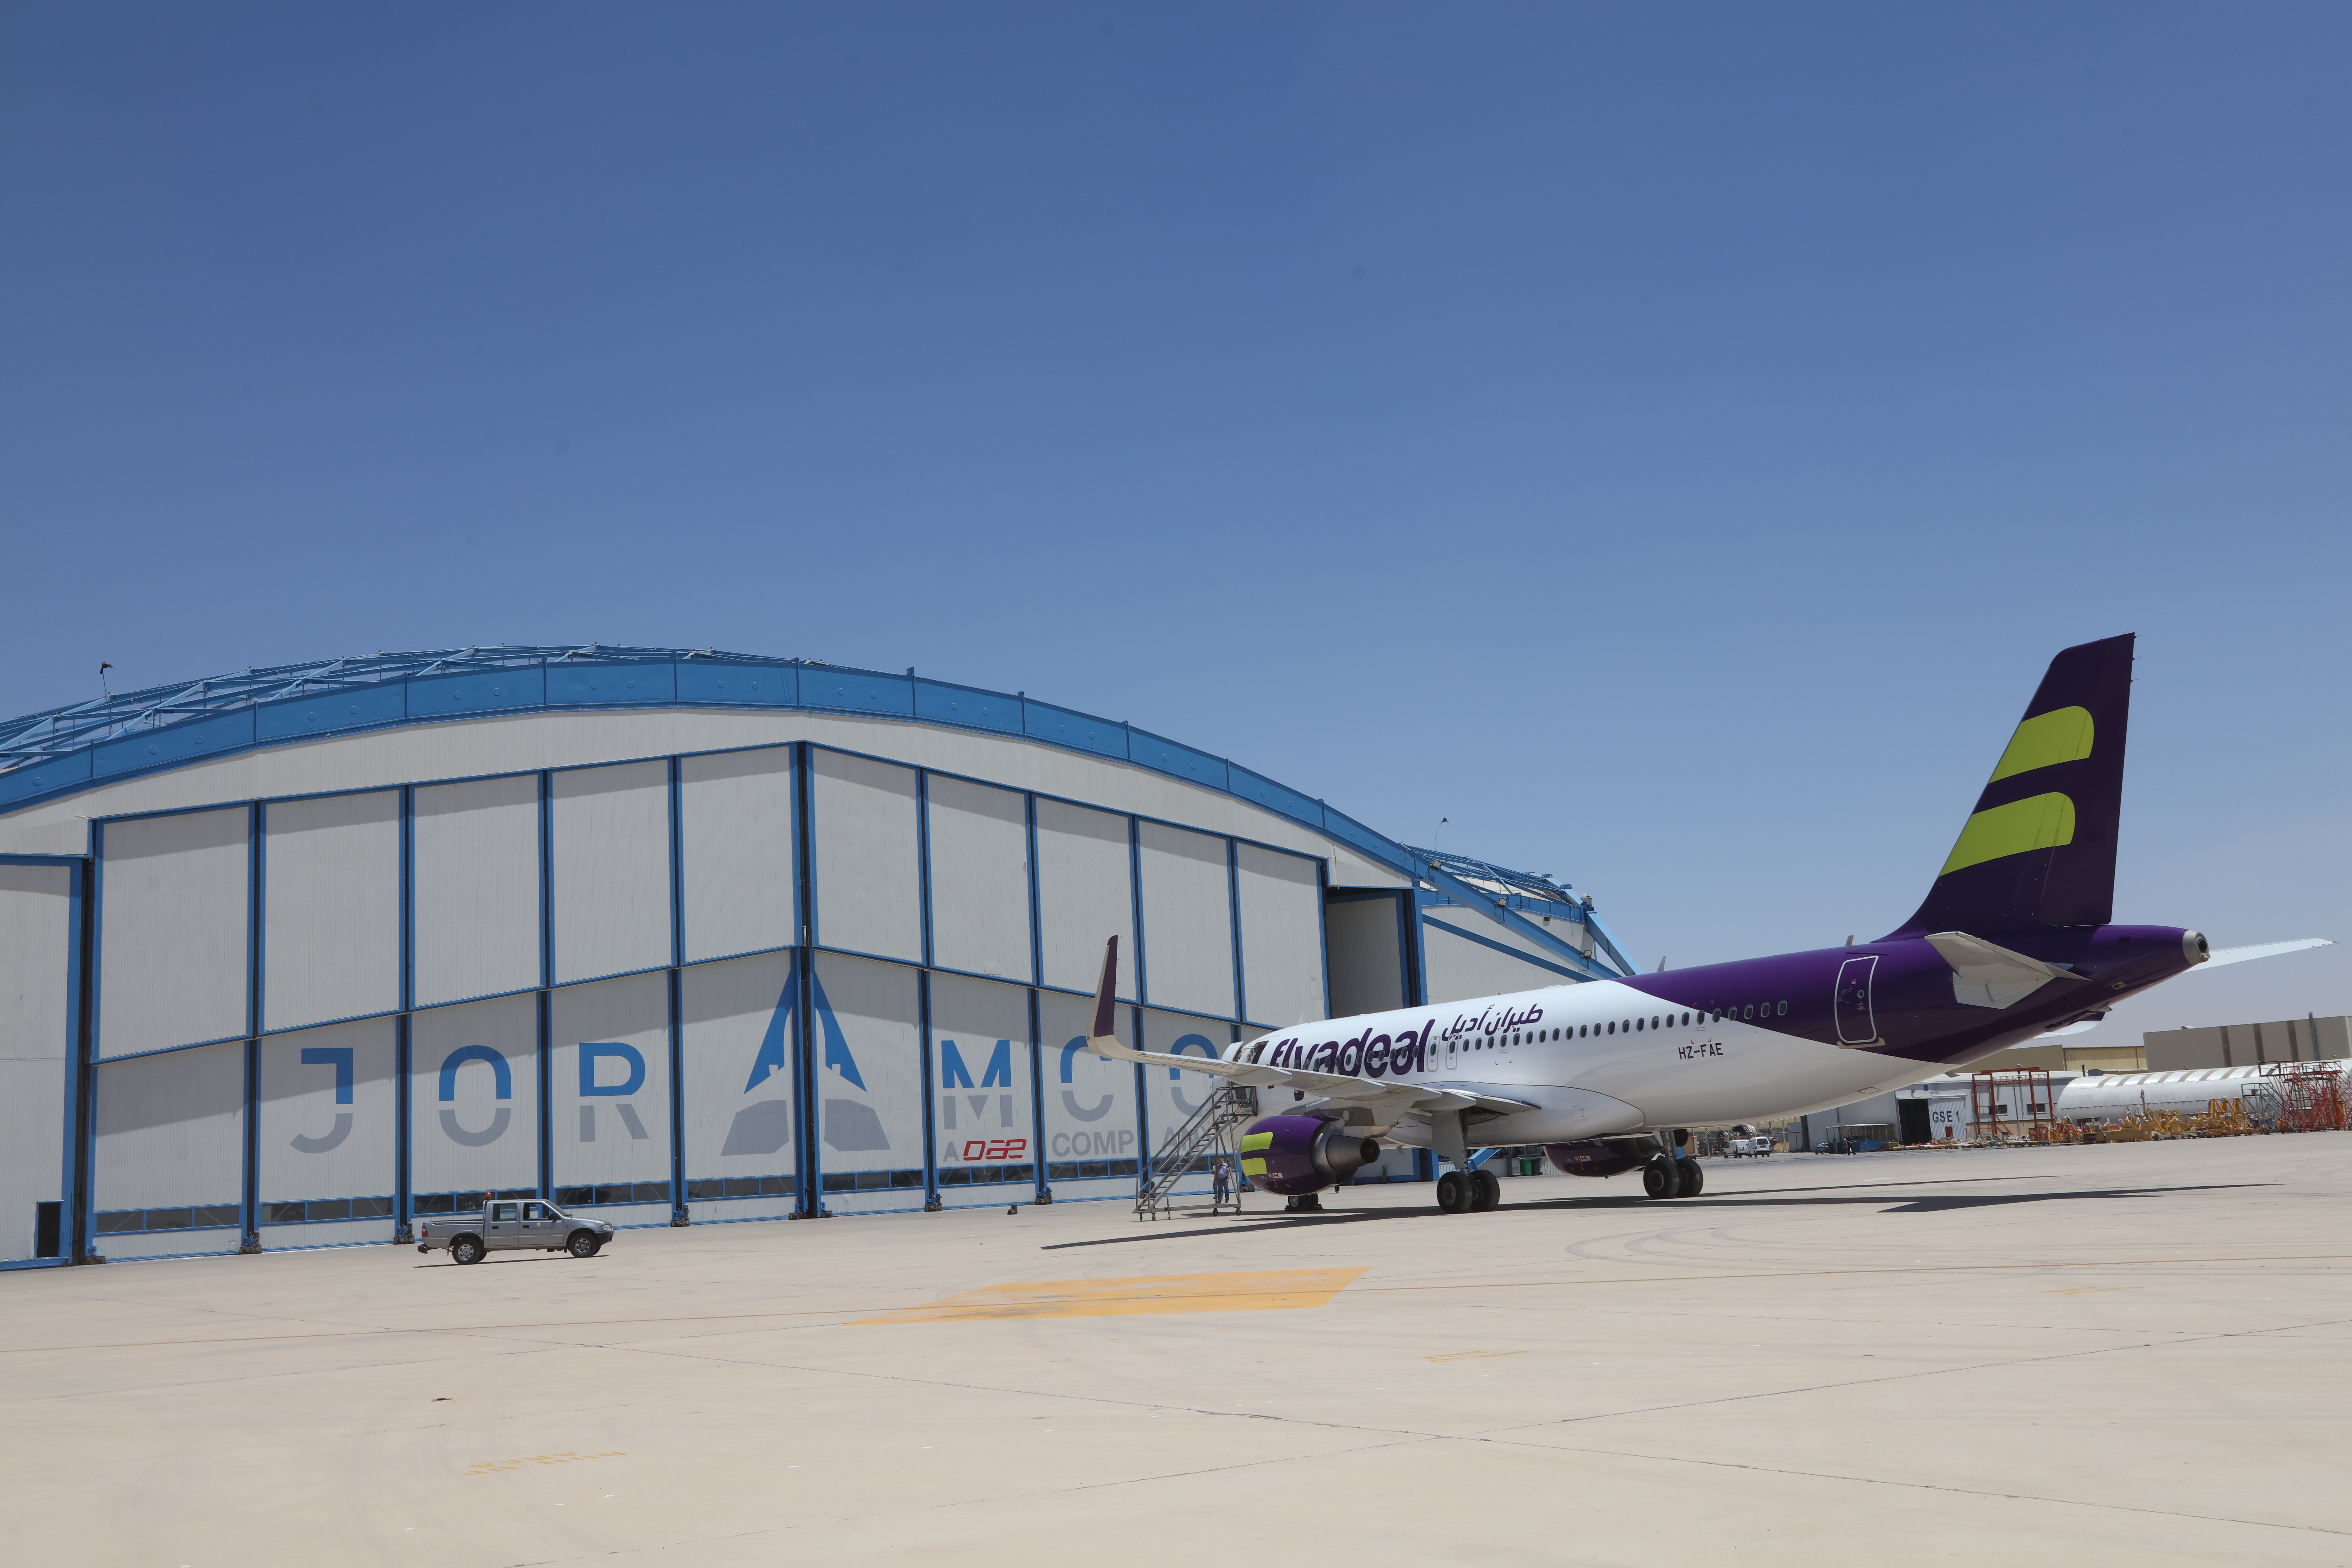 MRO Europe 2022: Joramco signs new maintenance agreement with flyadeal